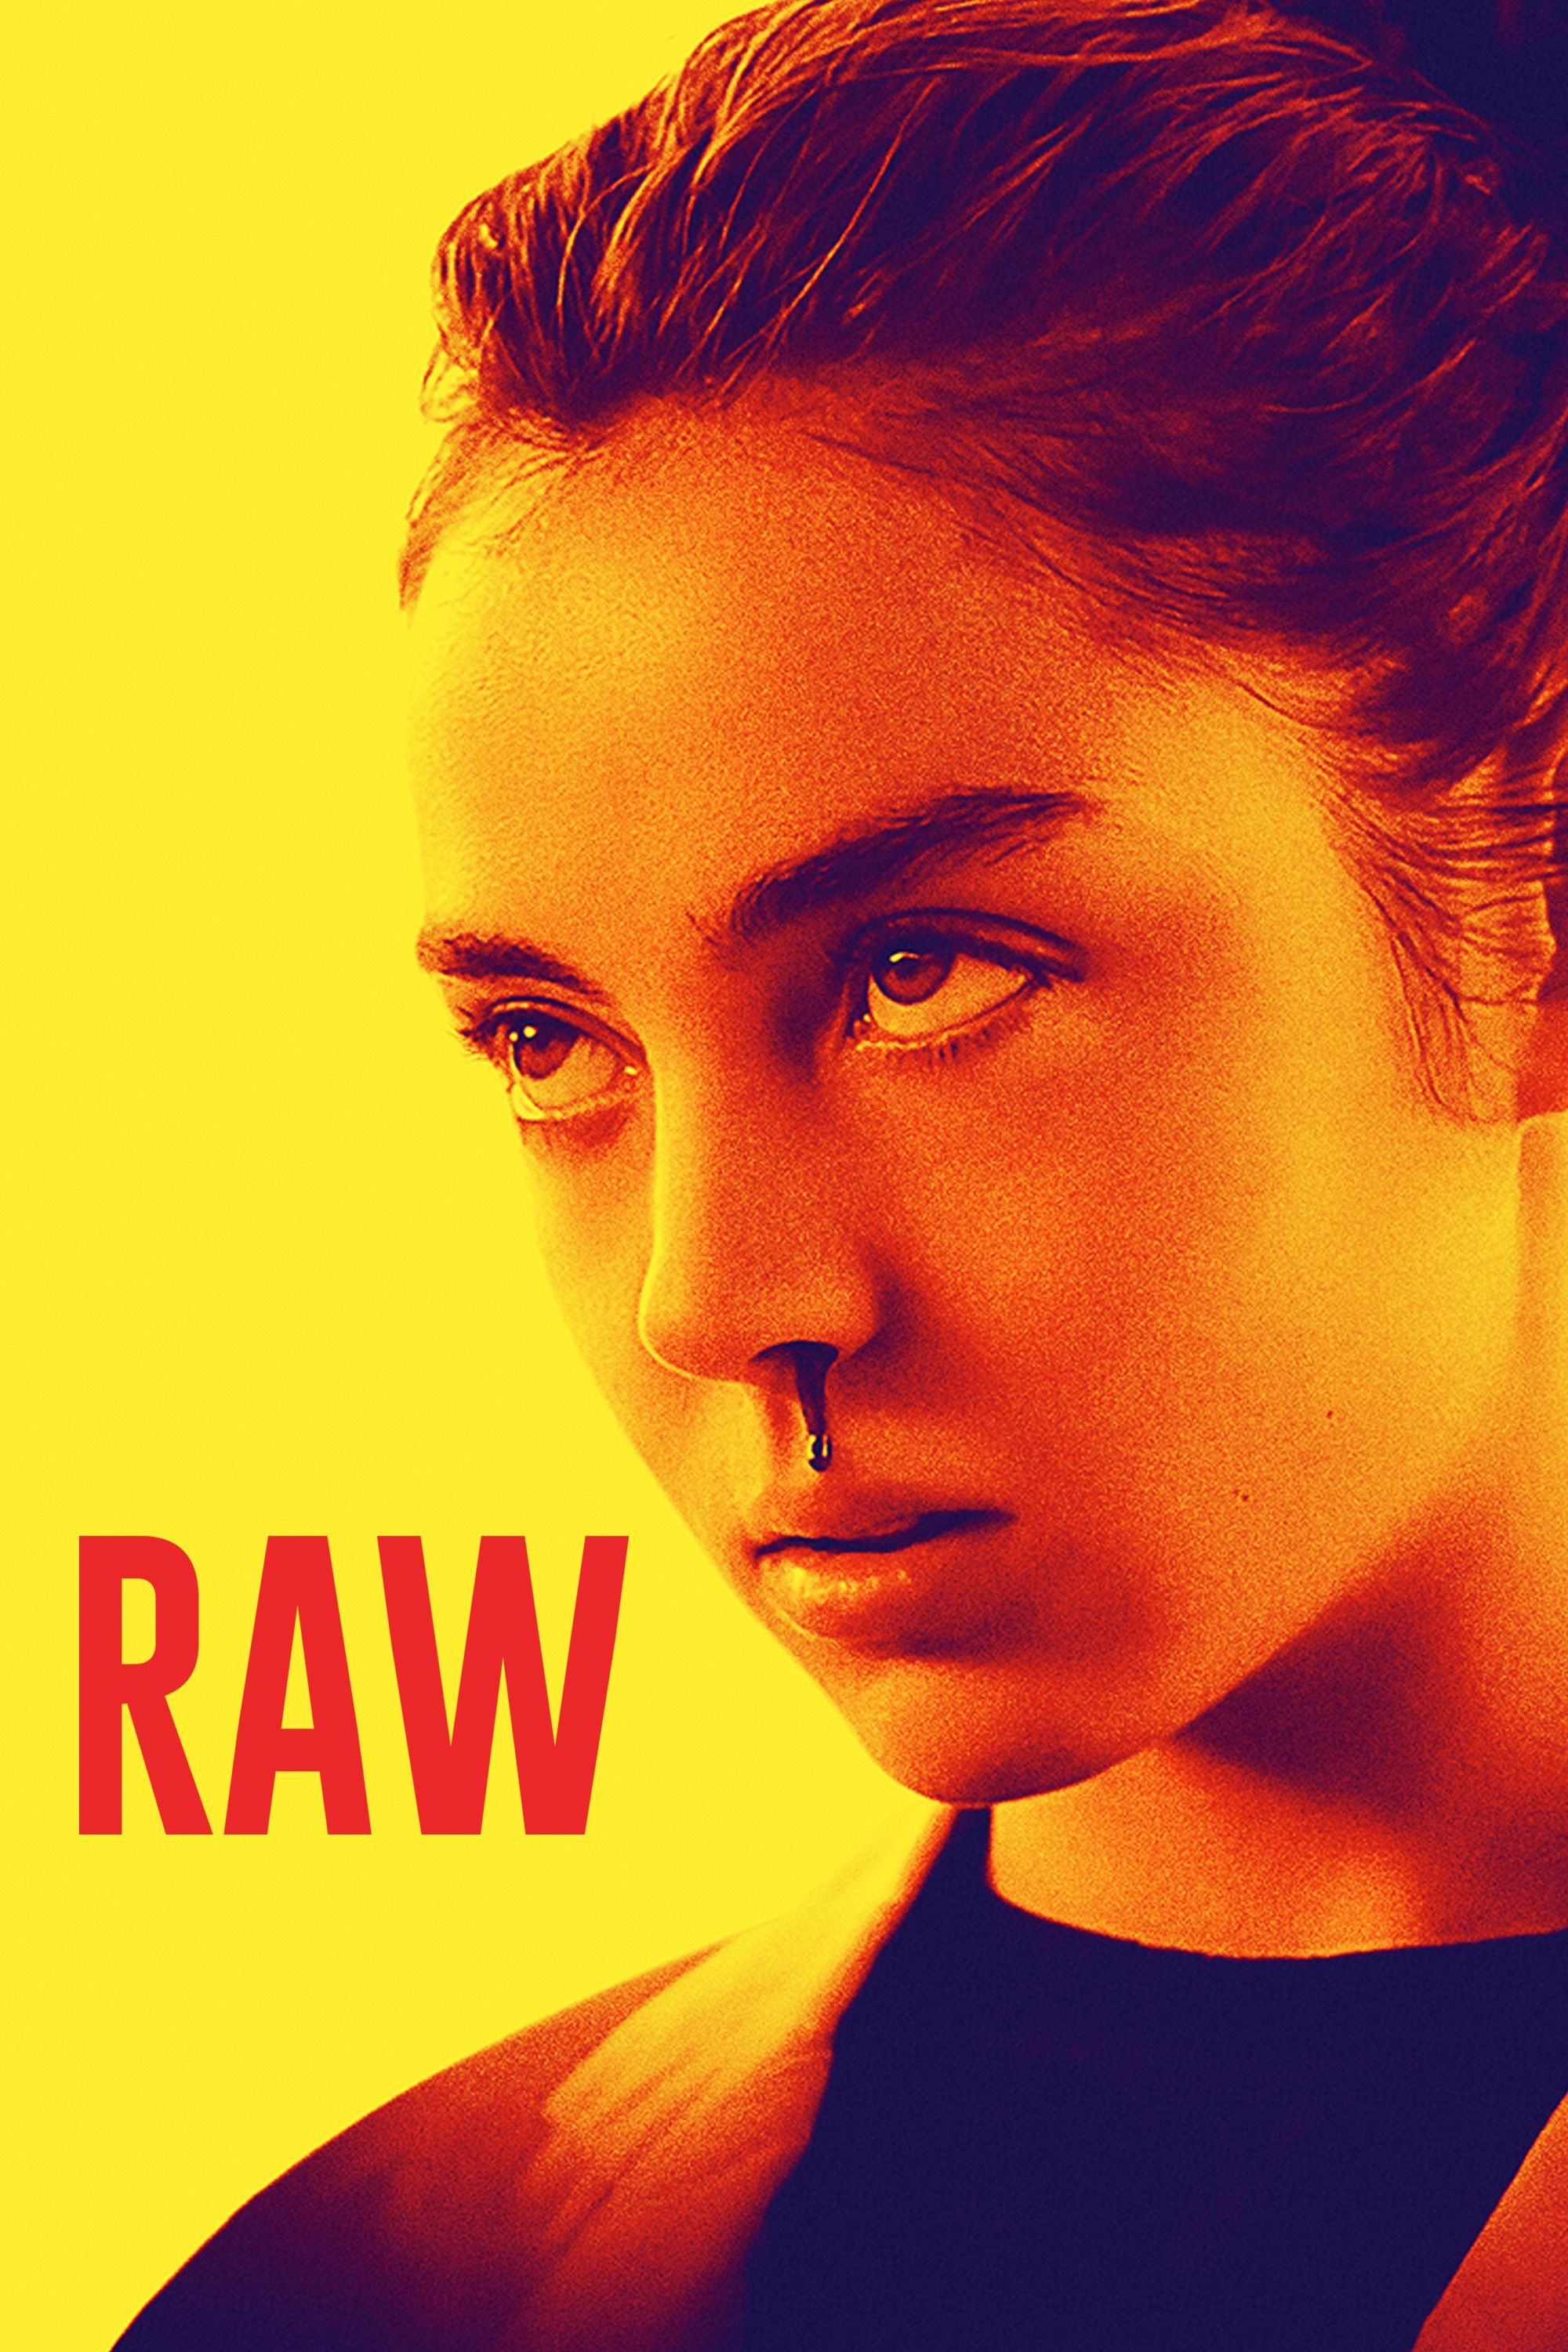 Raw 2016 movie download in hindi